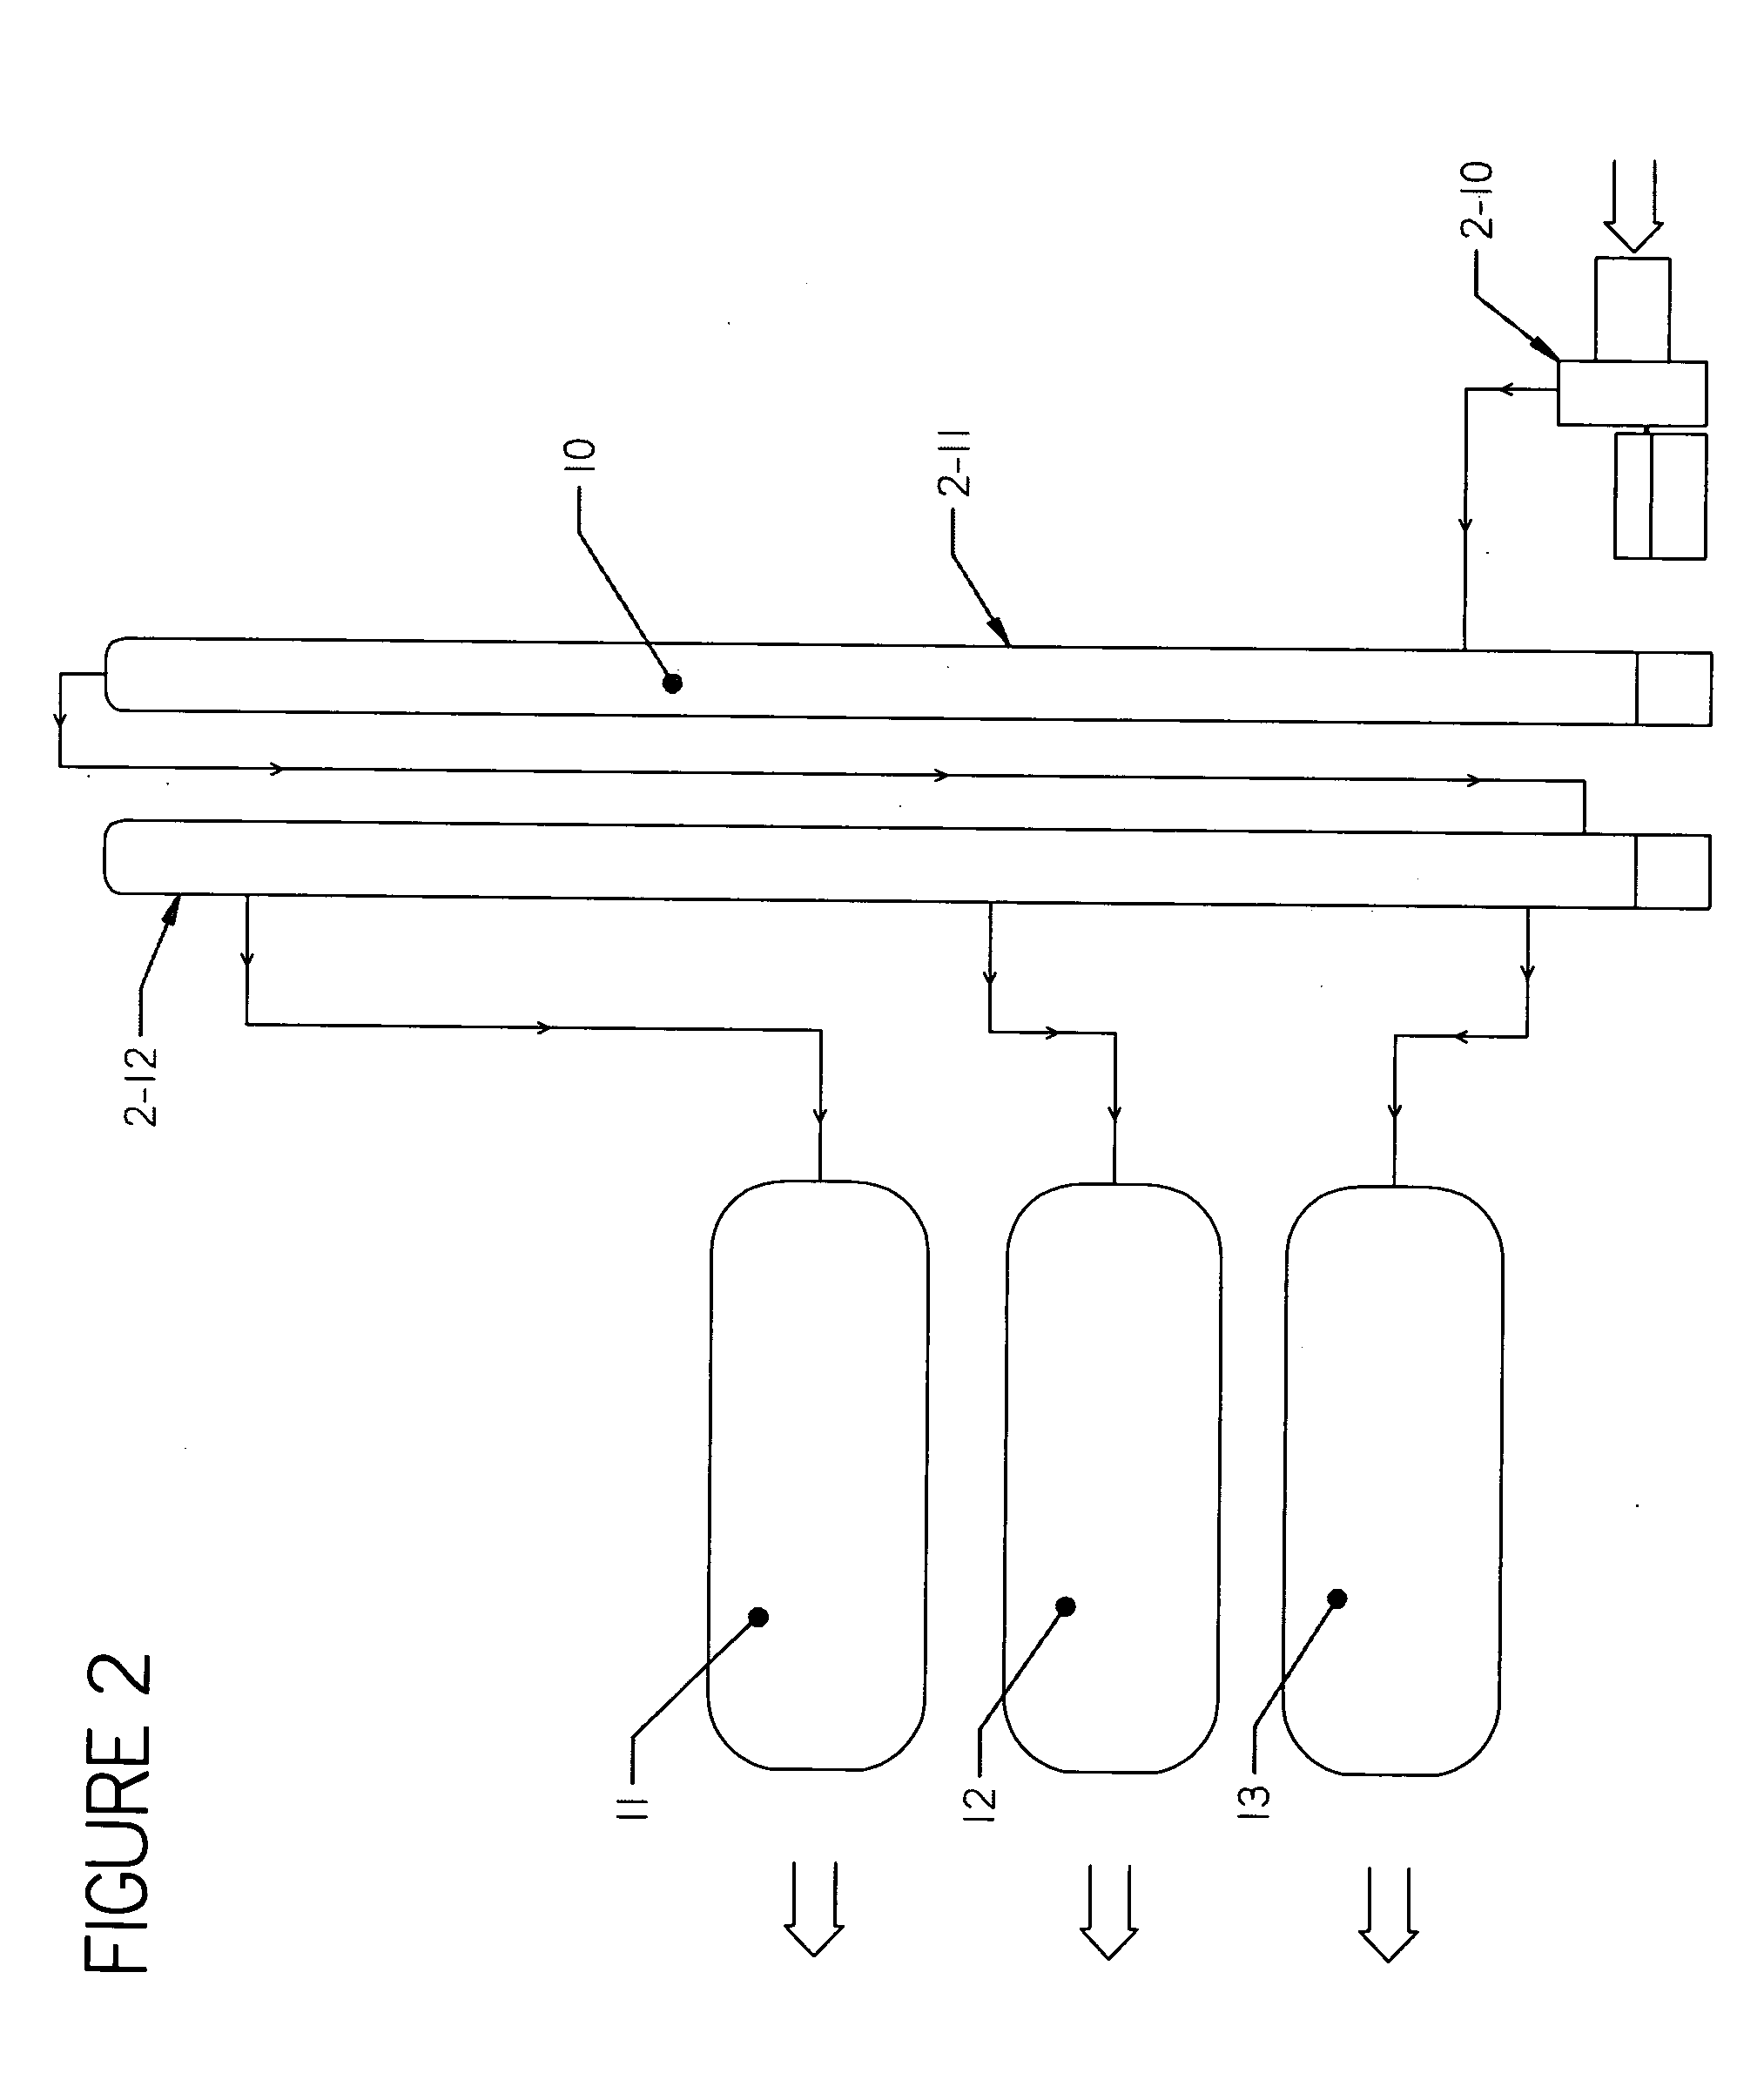 Oxygen-based biomass combustion system and method